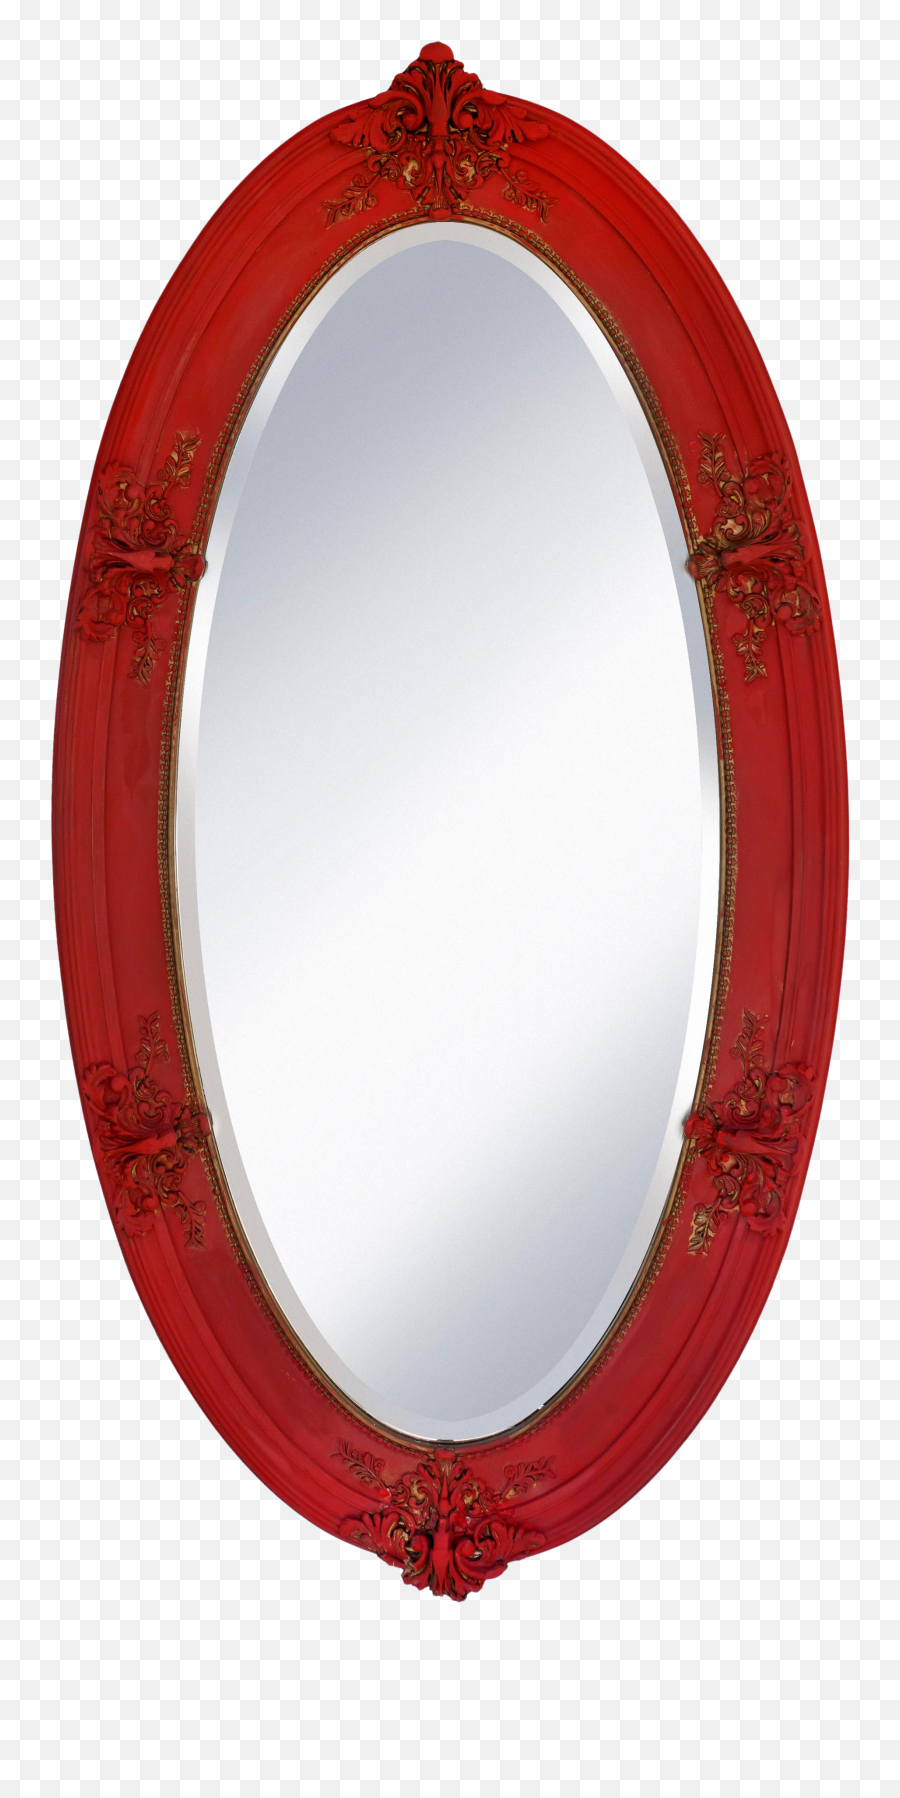 1900s Vintage Red Oval Mirror Png